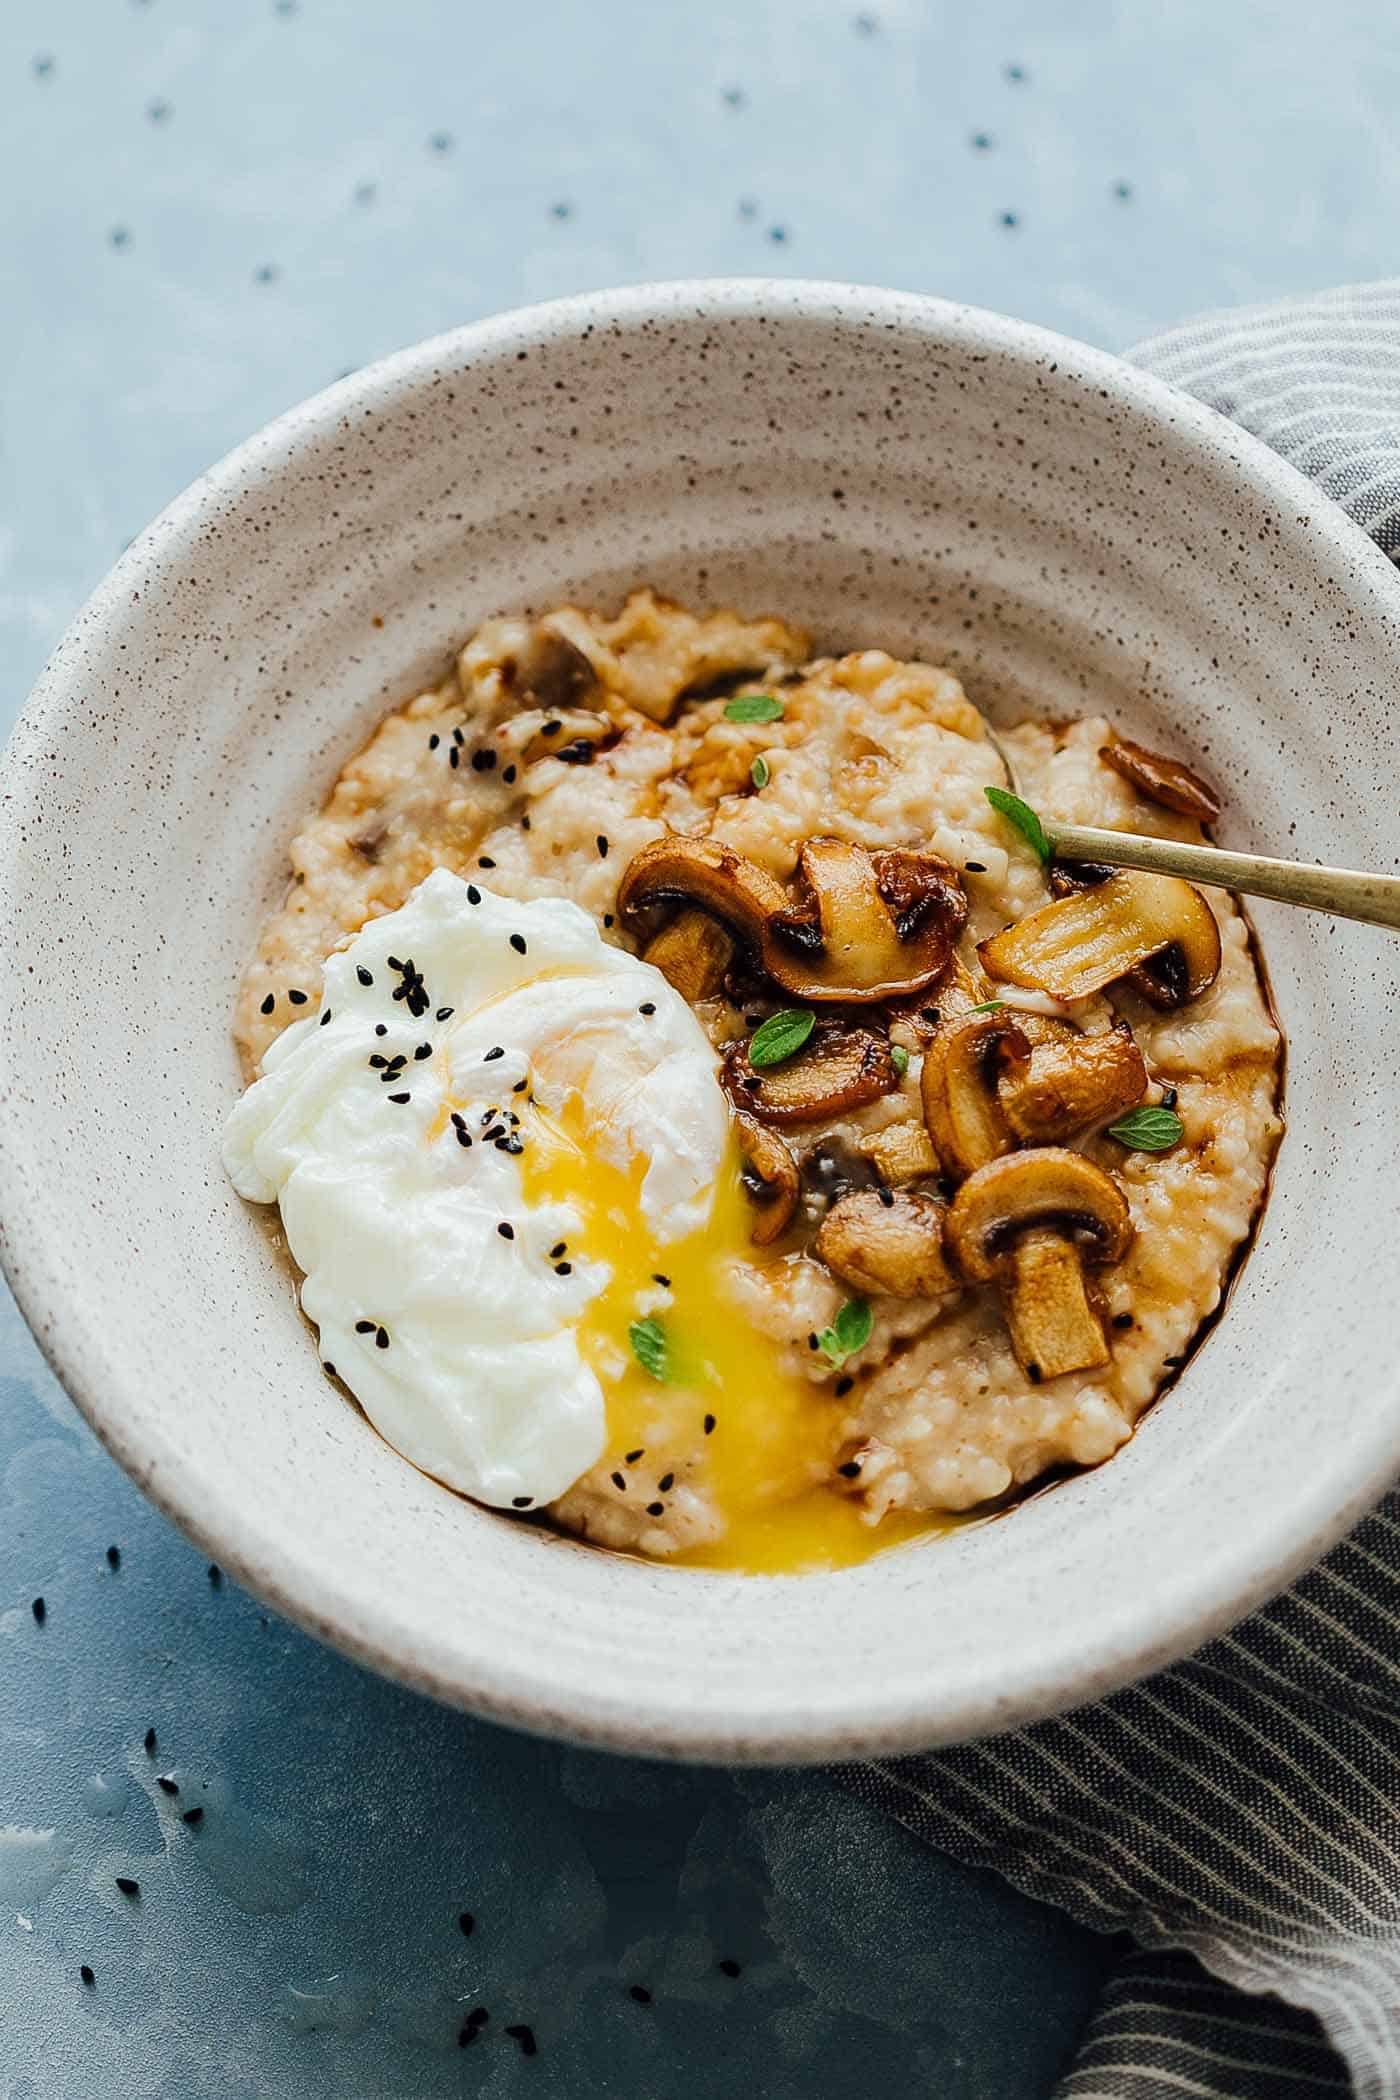 Mushroom oats is a creamy breakfast oatmeal that has the earthiness of mushrooms combined with delicious Asian flavors. Top it with a poached egg, a dash of soy sauce and green onions and take this simple mushroom oatmeal to the next level!